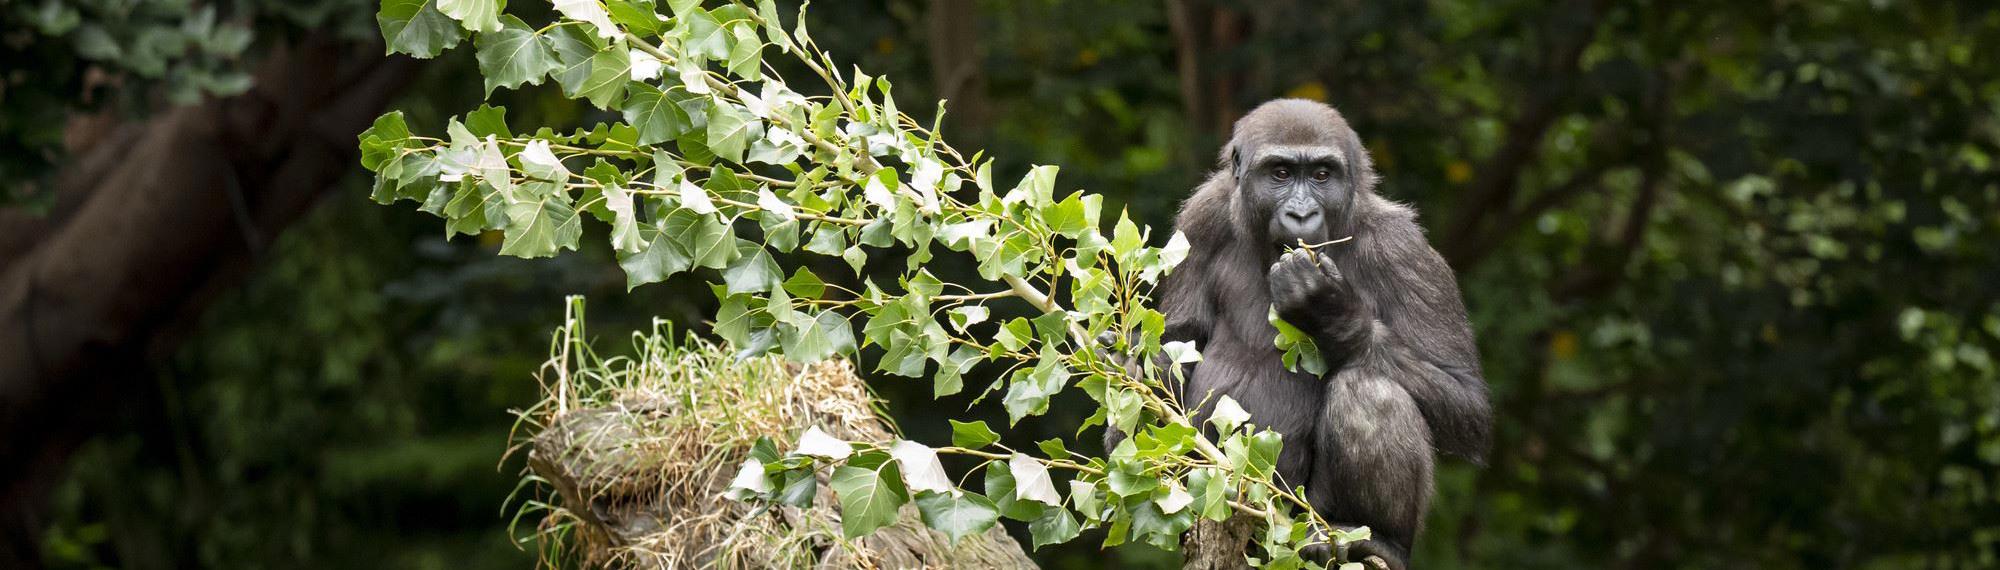 Wester Lowland Gorilla Kanzi eats some leaves from a branch